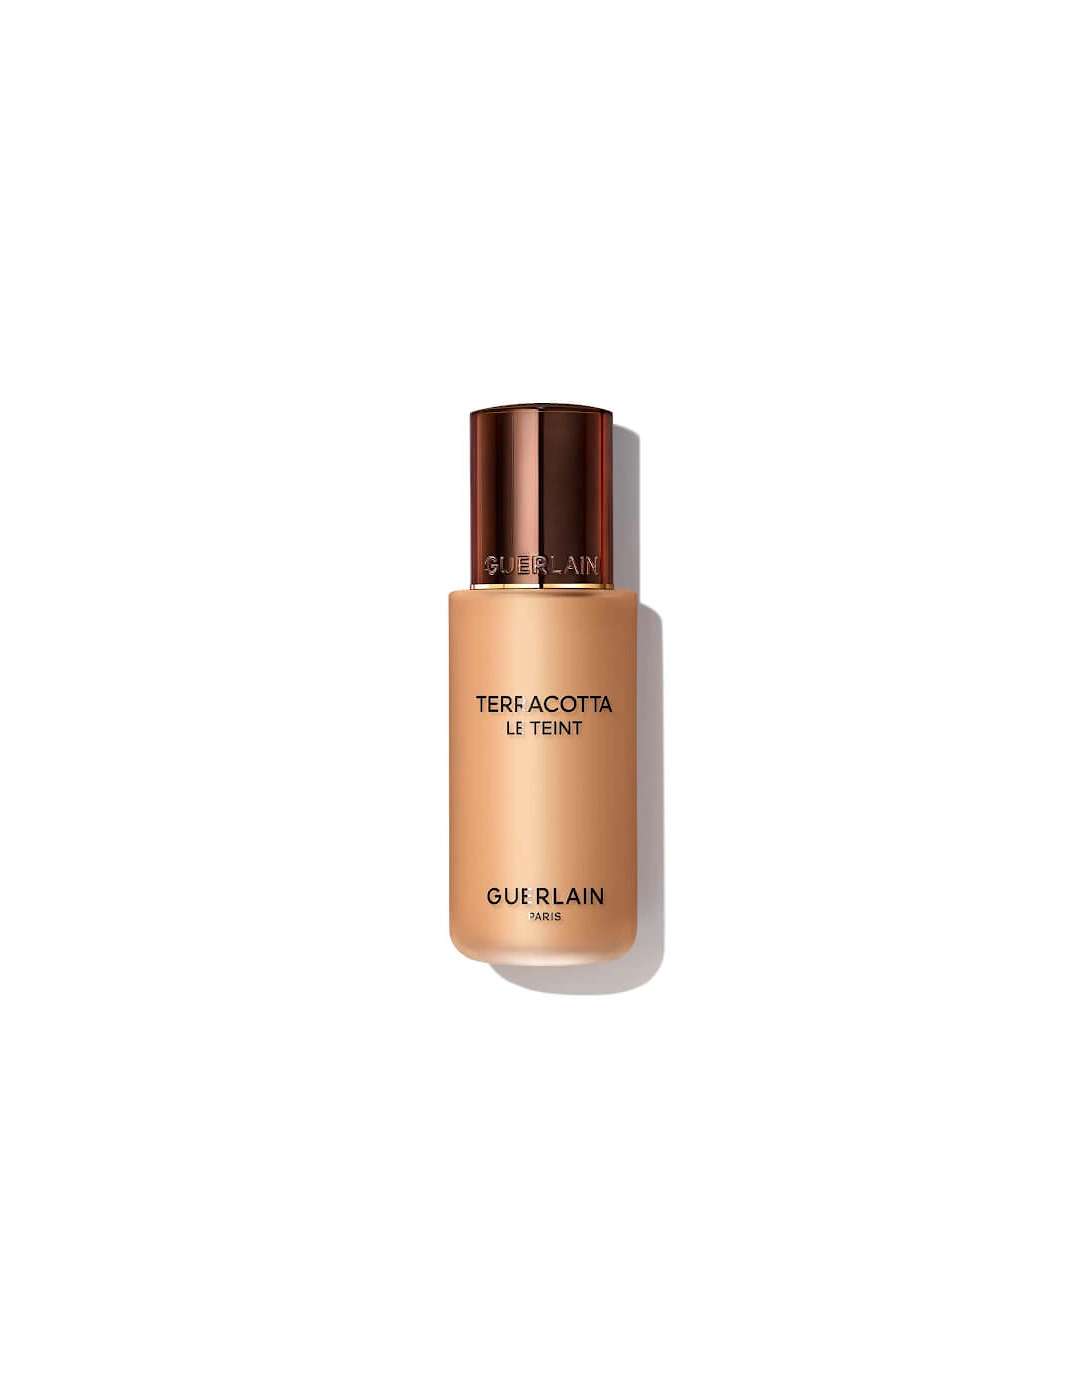 Terracotta Le Teint Healthy Glow Natural Perfection Foundation - 4.5W, 2 of 1